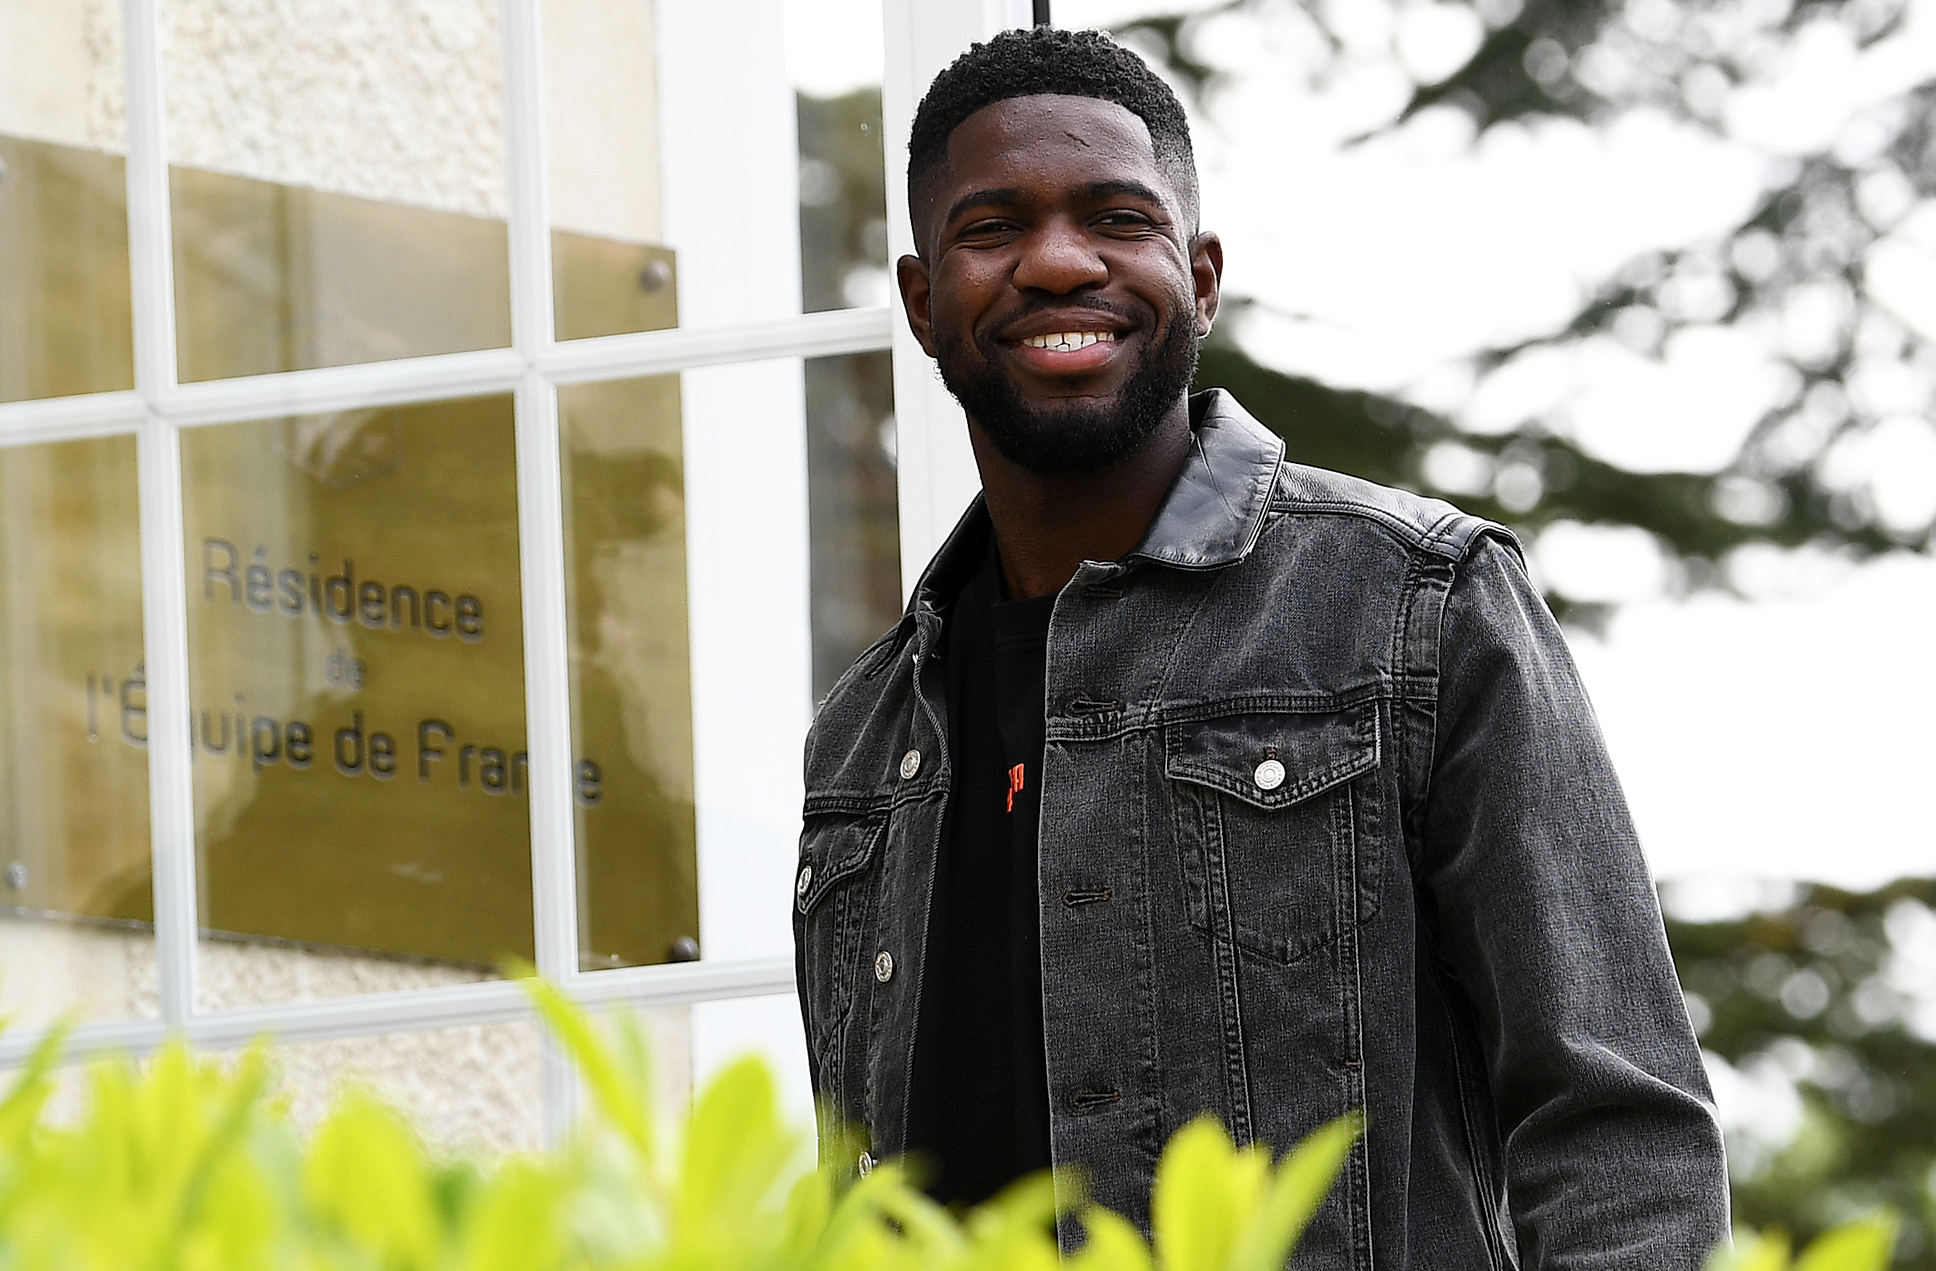 France's defender Samuel Umtiti arrives at the French national football team training base in Clairefontaine-en-Yvelines on May 29, 2019 as part of the team's preparation for the UEFA Euro 2020 qualifying Group H matches against Turkey and Andorra. (Photo by FRANCK FIFE / AFP)        (Photo credit should read FRANCK FIFE/AFP/Getty Images)